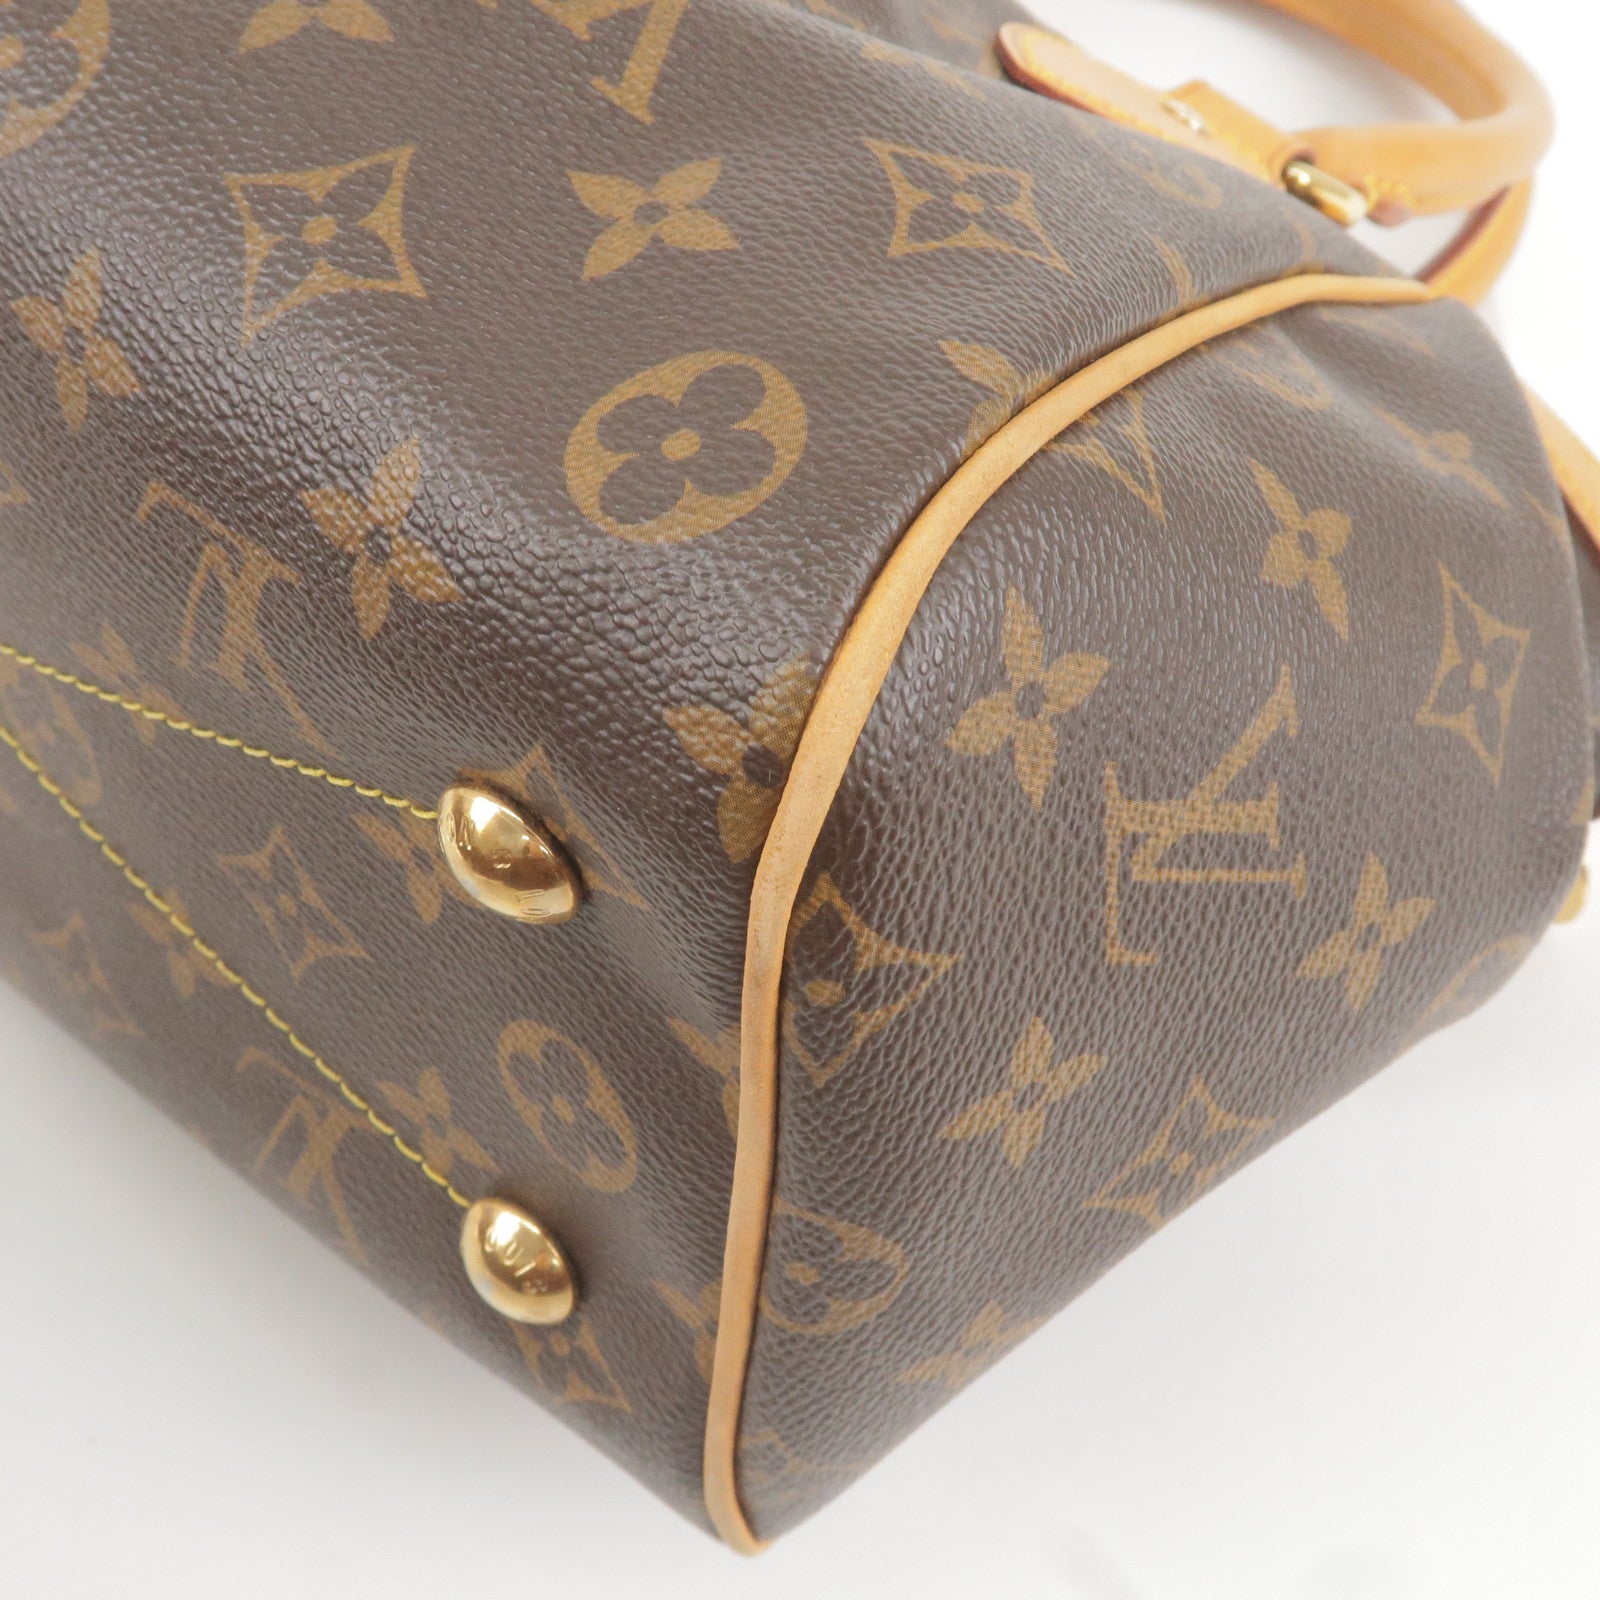 Louis Vuitton 2013 pre-owned Limited Edition Rouge Monogram